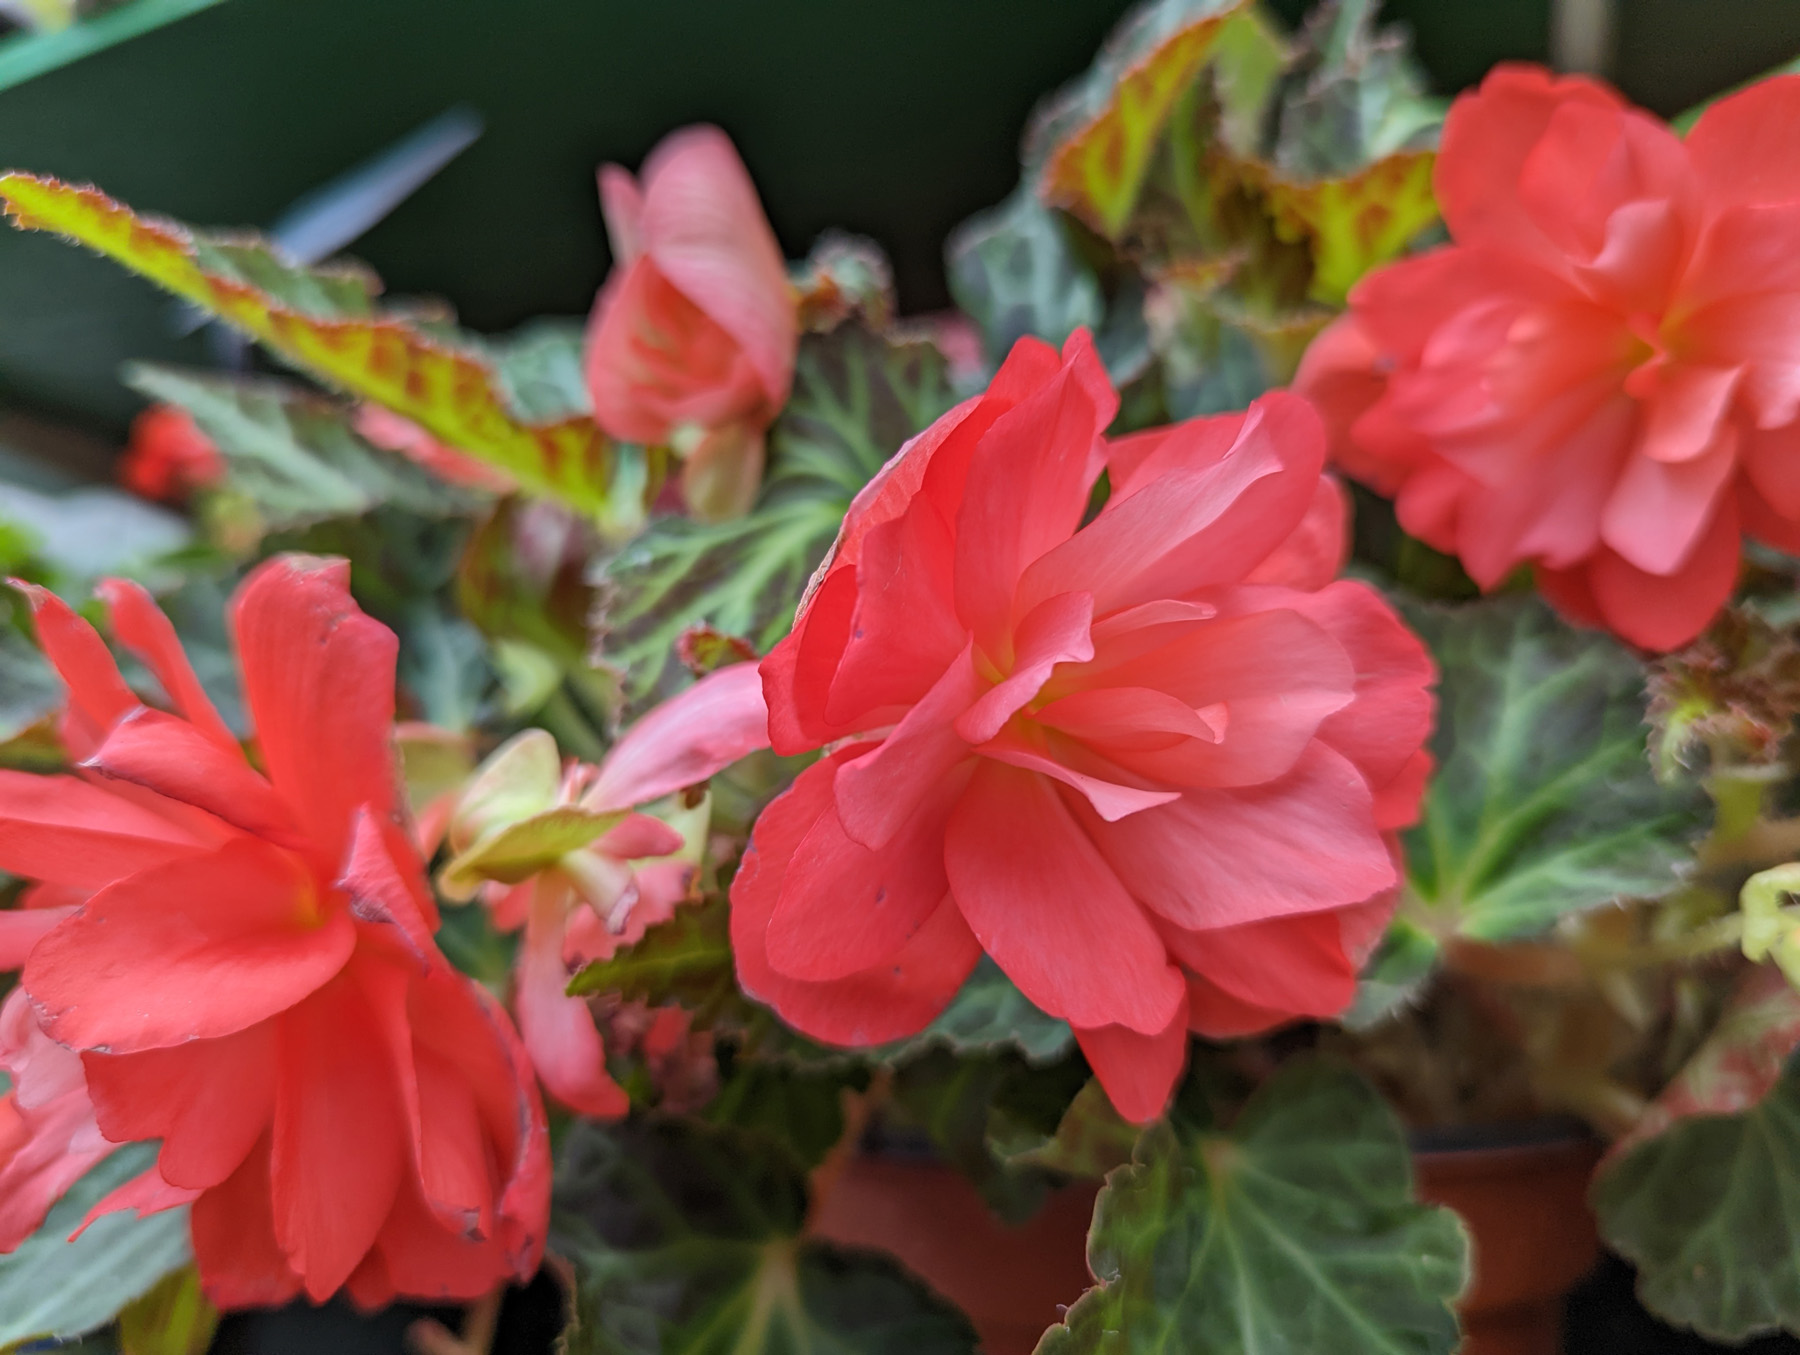 They are often used as container plants on patios and porches, in hanging baskets, and as bedding plants. They need frequent watering and light fertilization. 